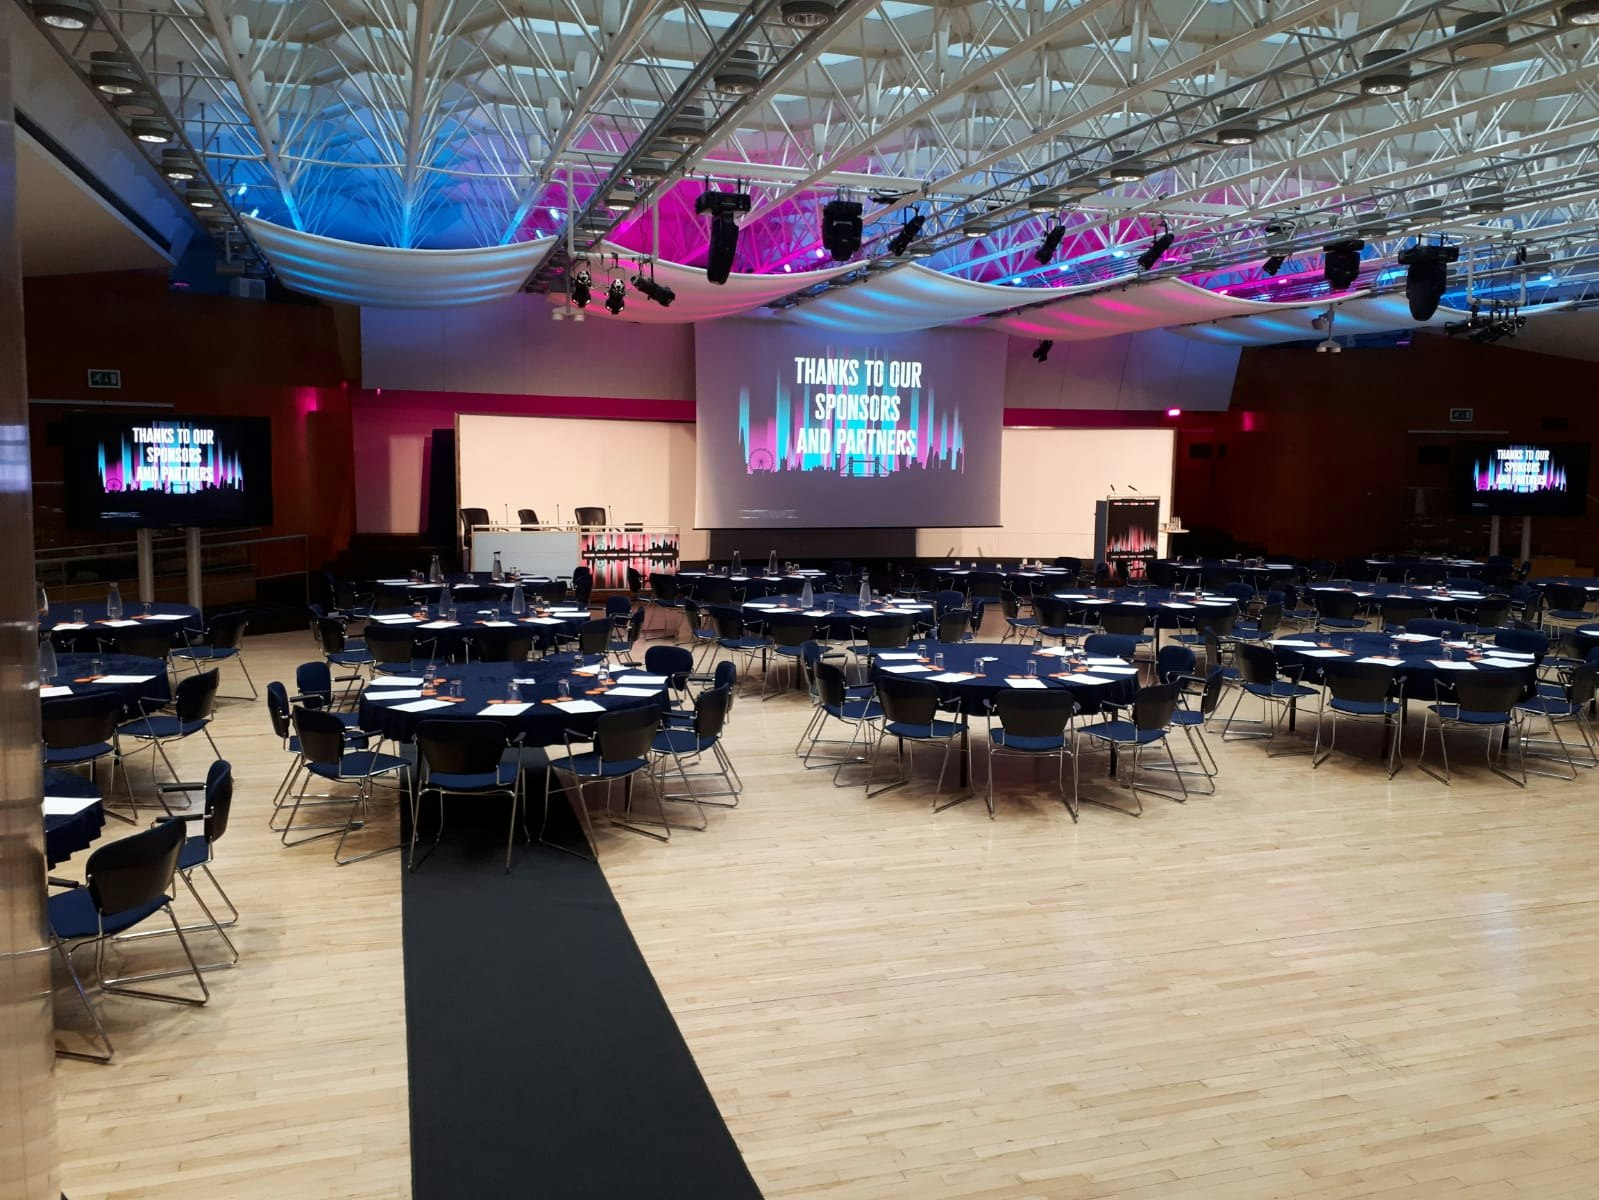 Cheap Conference Venues in London - Congress Centre - Business in Congress Hall - Banner